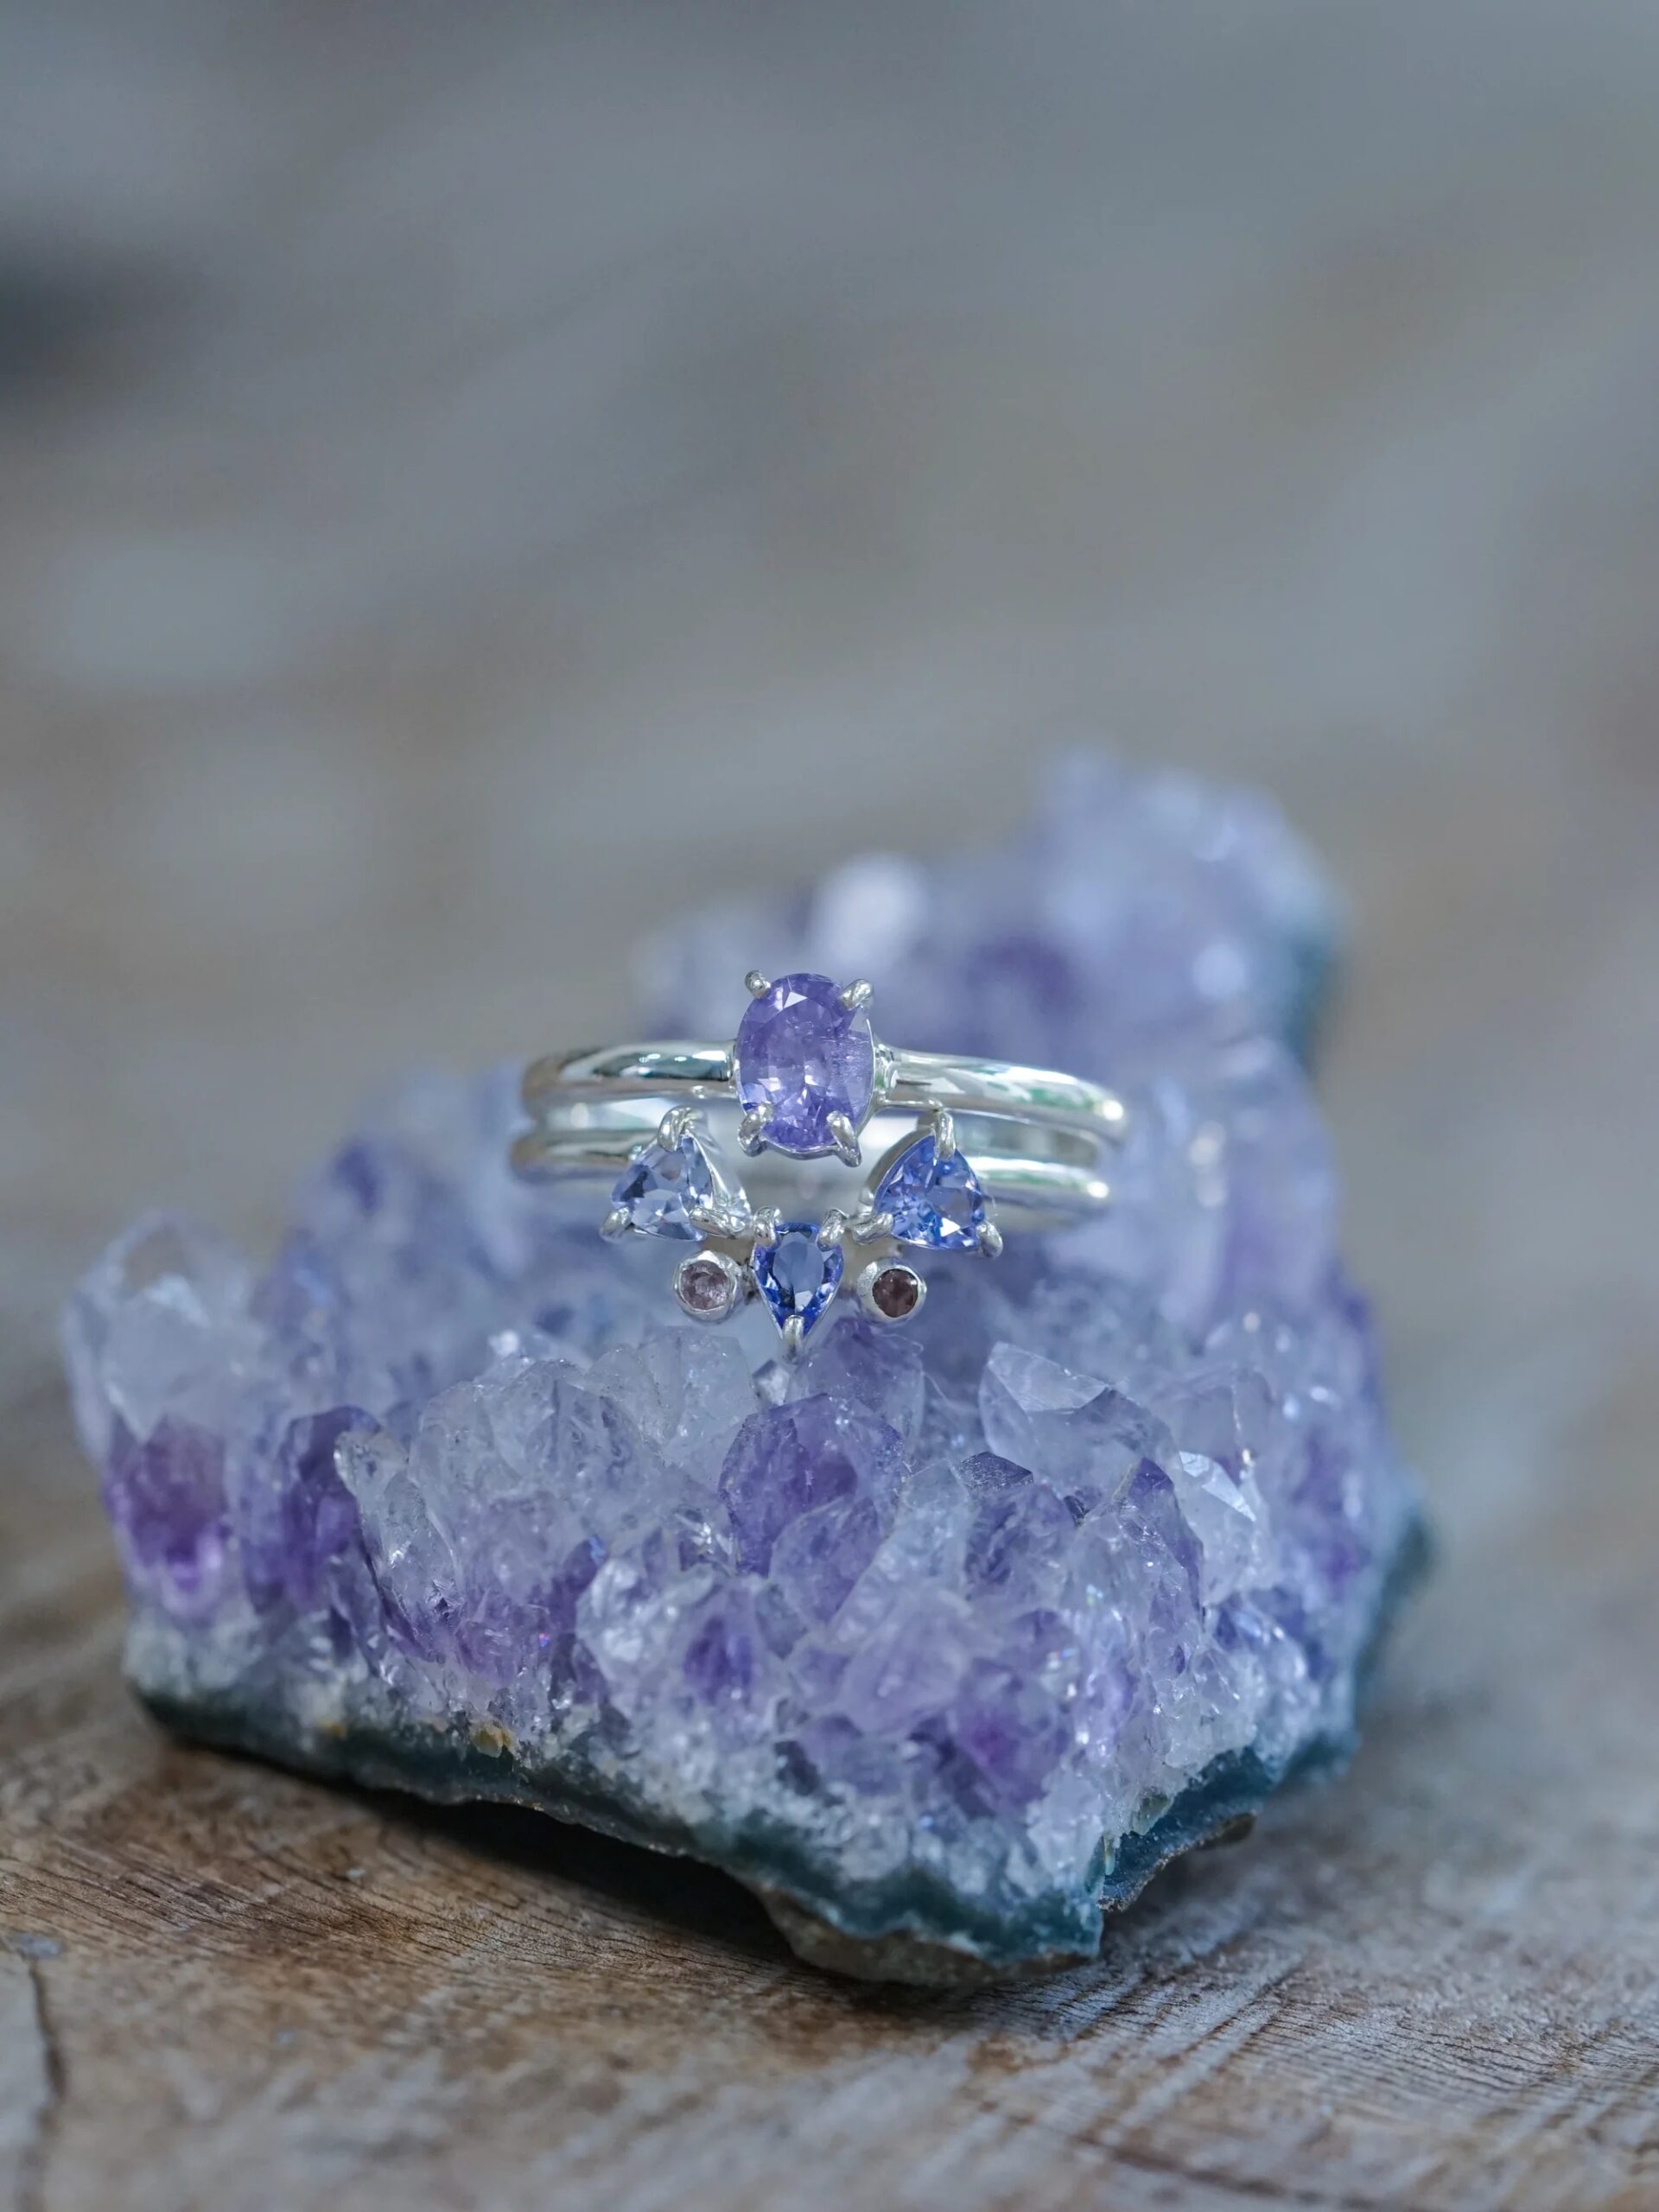 Silver ring with a central purple gemstone flanked by clear stones, displayed on an amethyst crystal cluster.